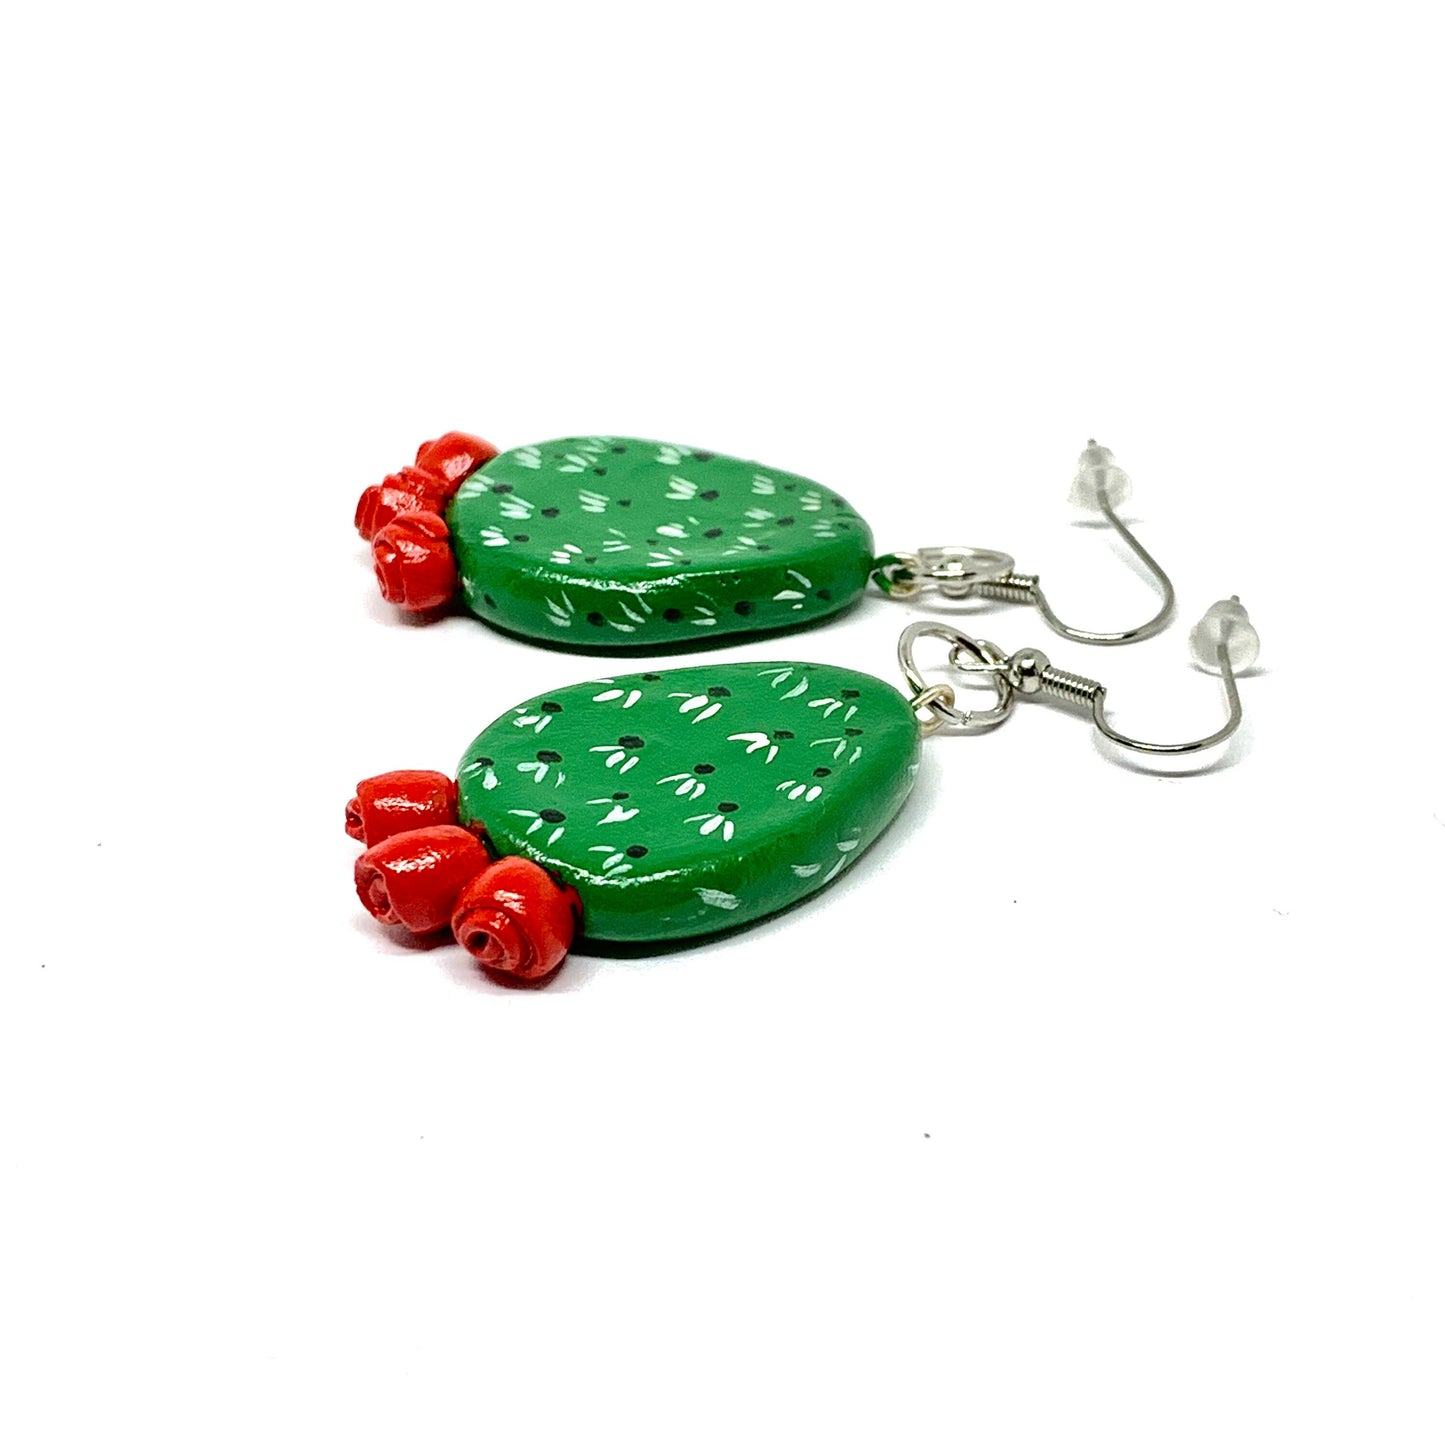 Trendy Clay Cactus Earrings Ethnic Artisan Desiged Hand Painted Mexico Art to Wear Girl Fashion Food Jewelry Mexican Nopales Aretes de Mujer